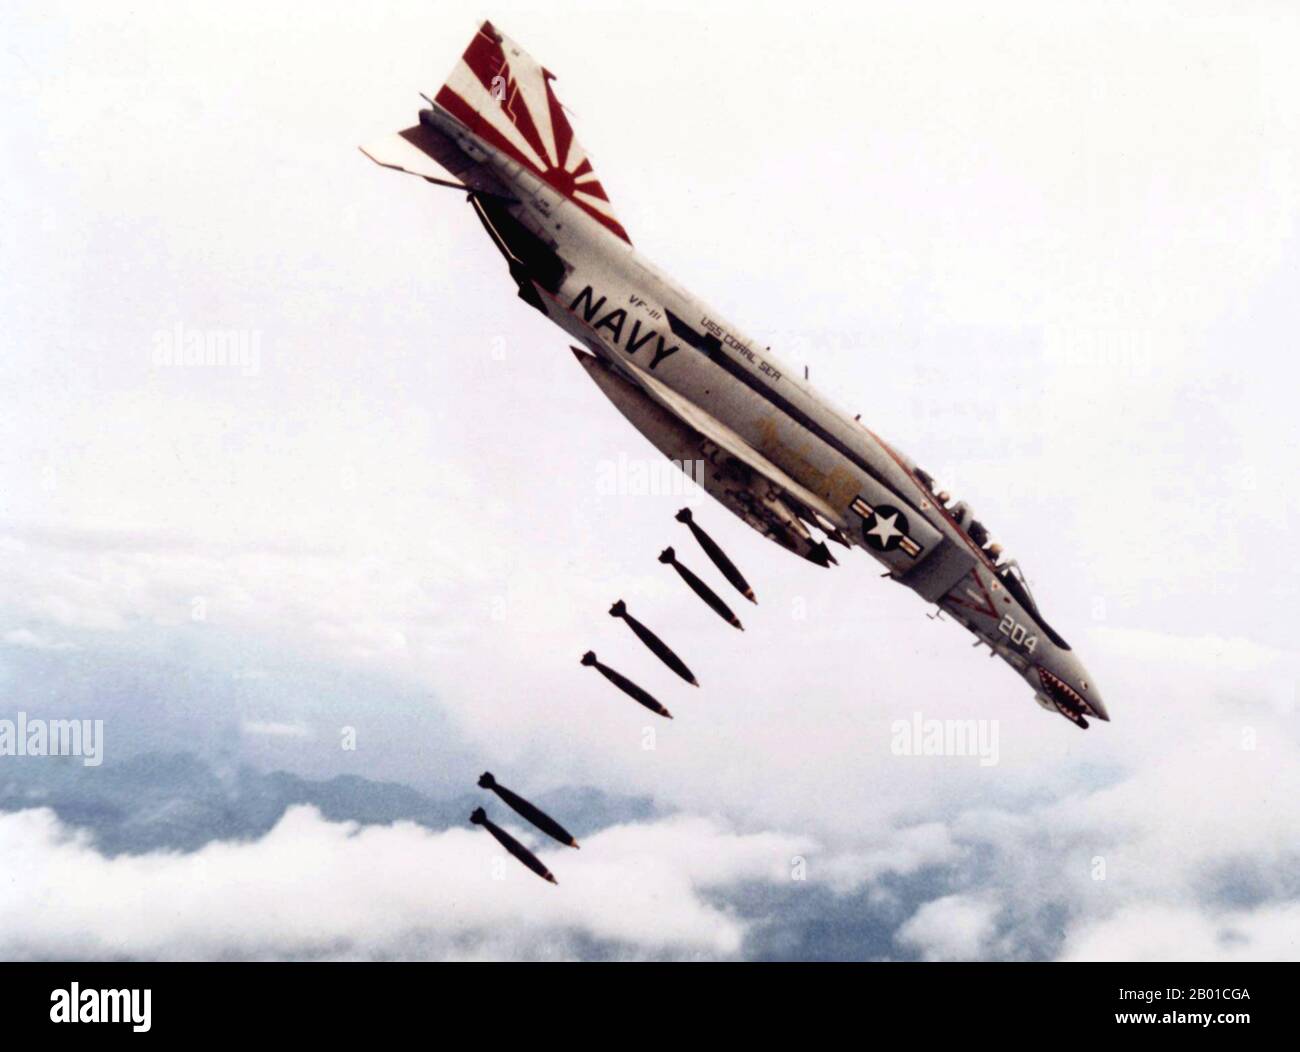 Vietnam: A US Navy McDonnell F-4B Phantom II from the USS Coral Sea drops bombs over Vietnam, 25  November 1971.  The Second Indochina War, known in America as the Vietnam War, was a Cold War era military conflict that occurred in Vietnam, Laos, and Cambodia from 1 November 1955 to the fall of Saigon on 30 April 1975. This war followed the First Indochina War and was fought between North Vietnam, supported by its communist allies, and the government of South Vietnam, supported by the U.S. and other anti-communist nations. Stock Photo